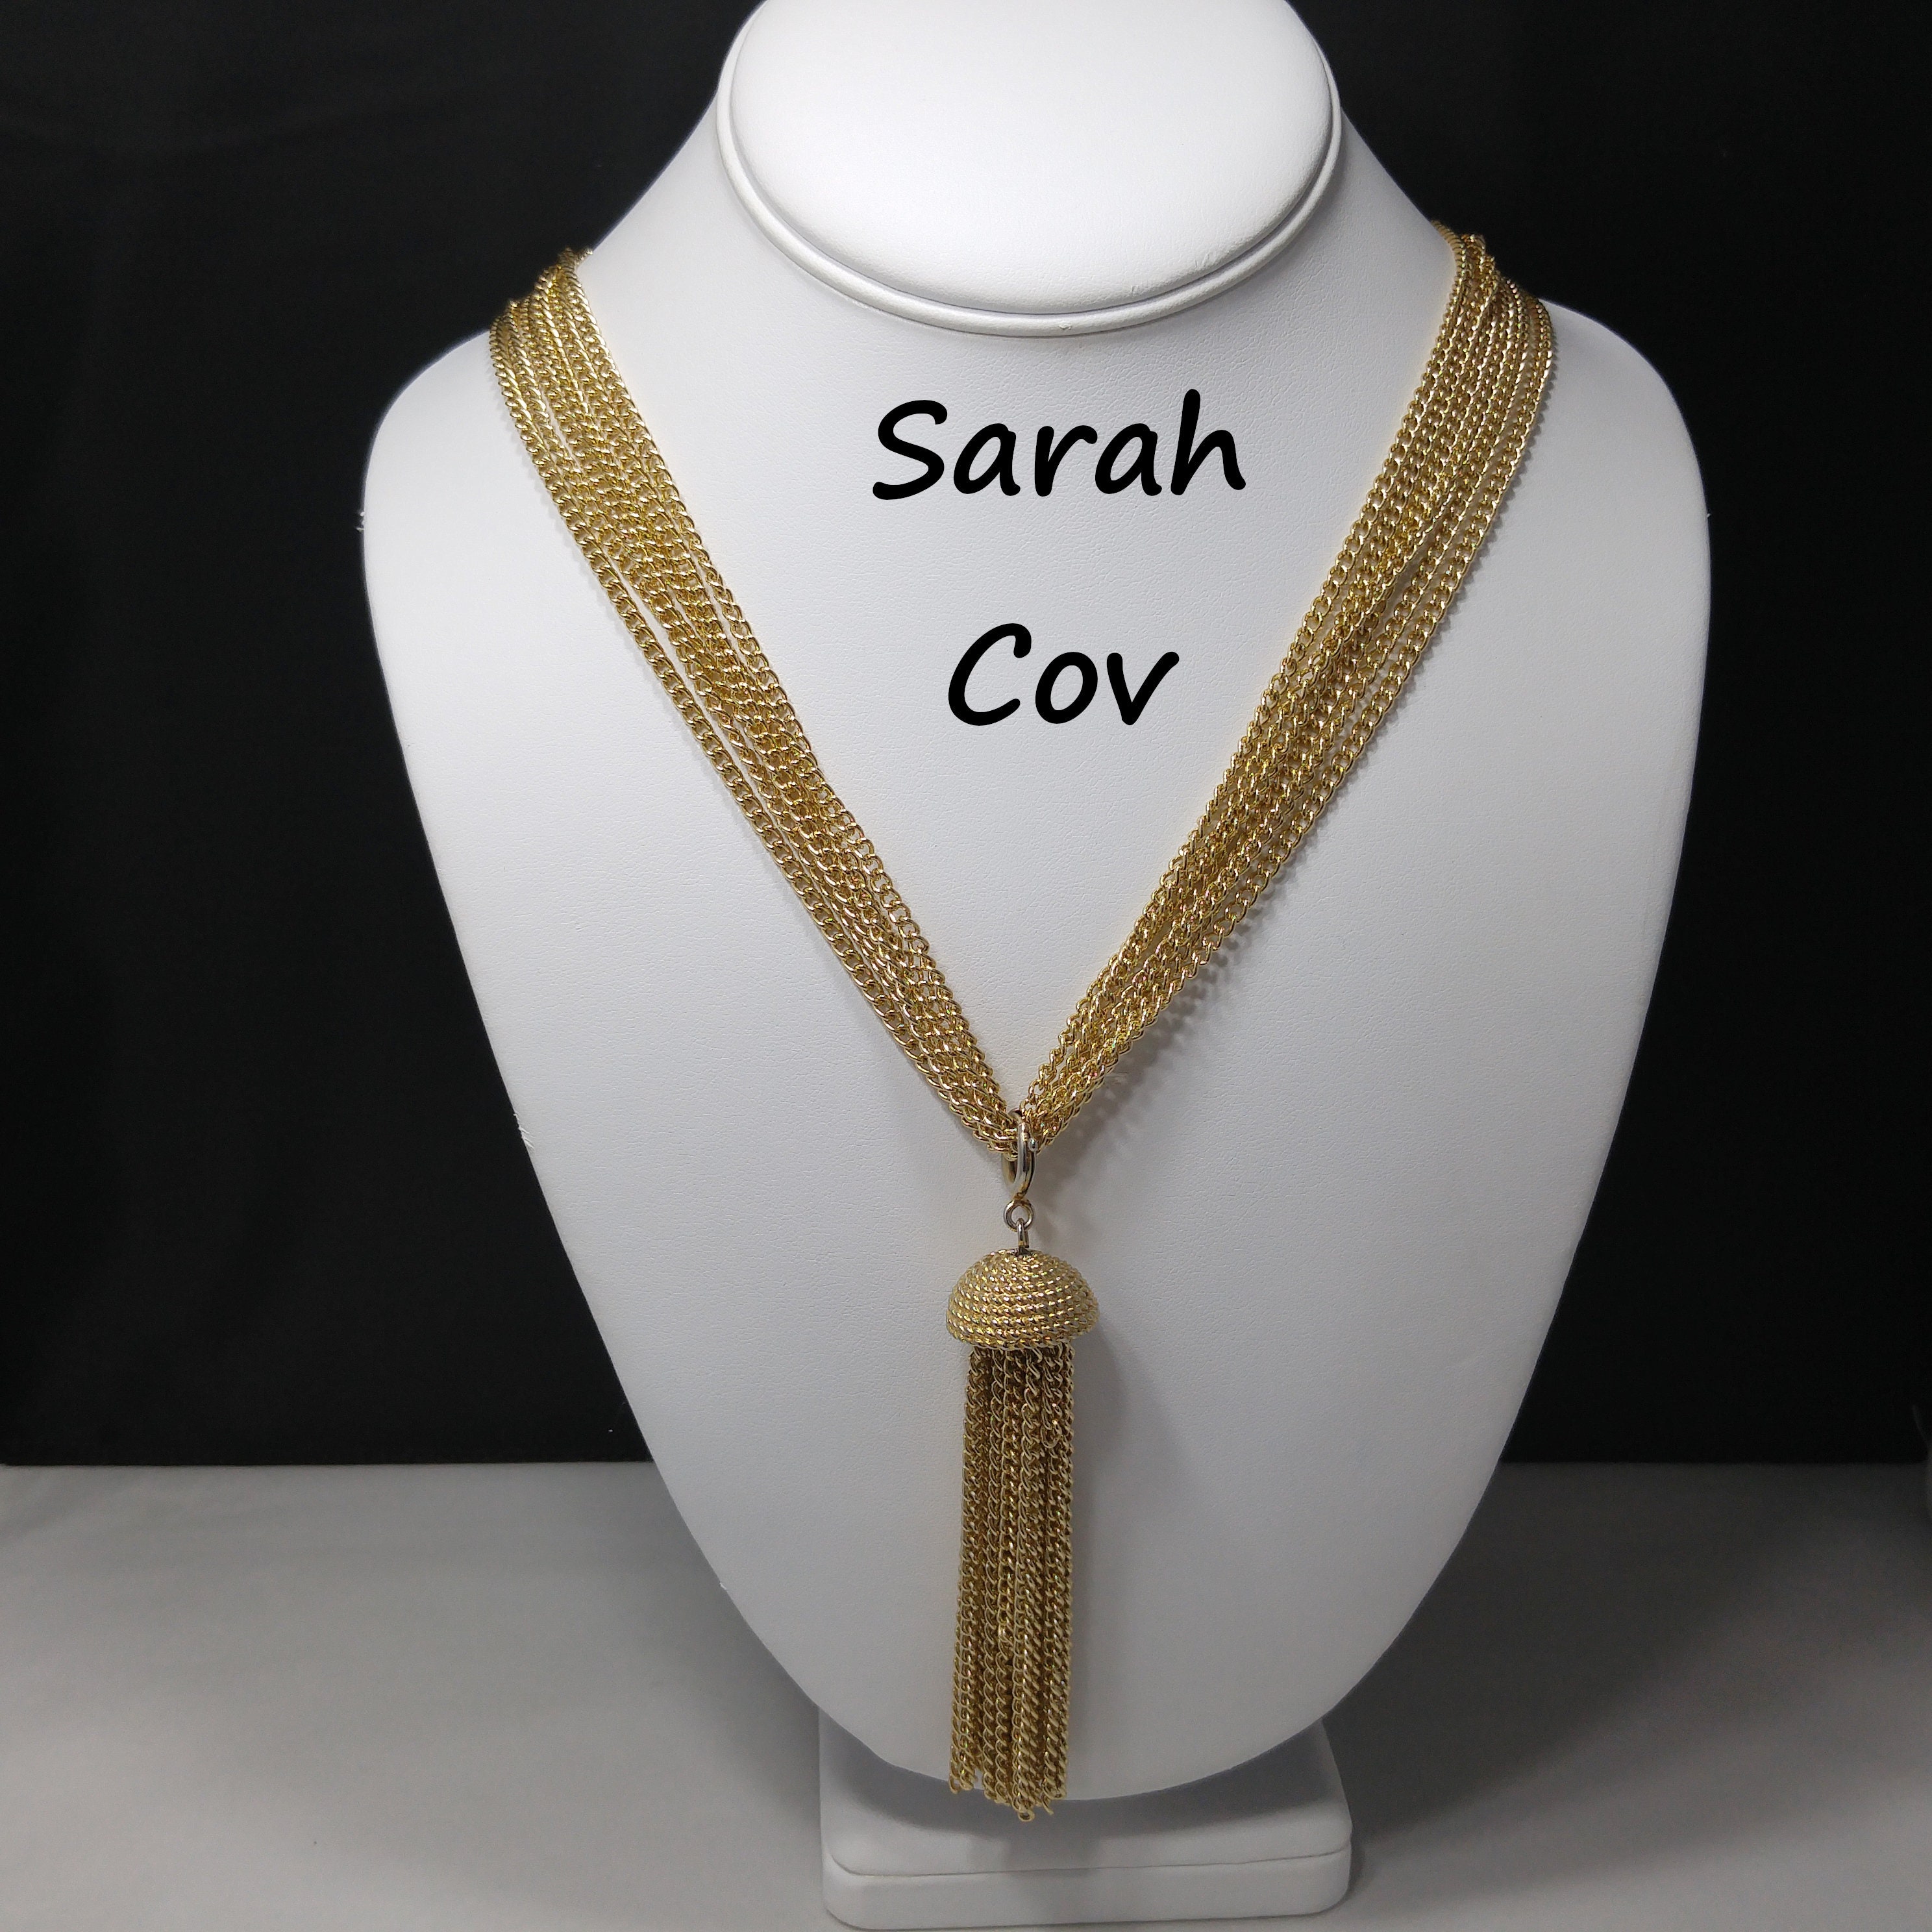 Buy Vintage Sarah Cov Signed Gold Chain Necklace Choker Online in India -  Etsy